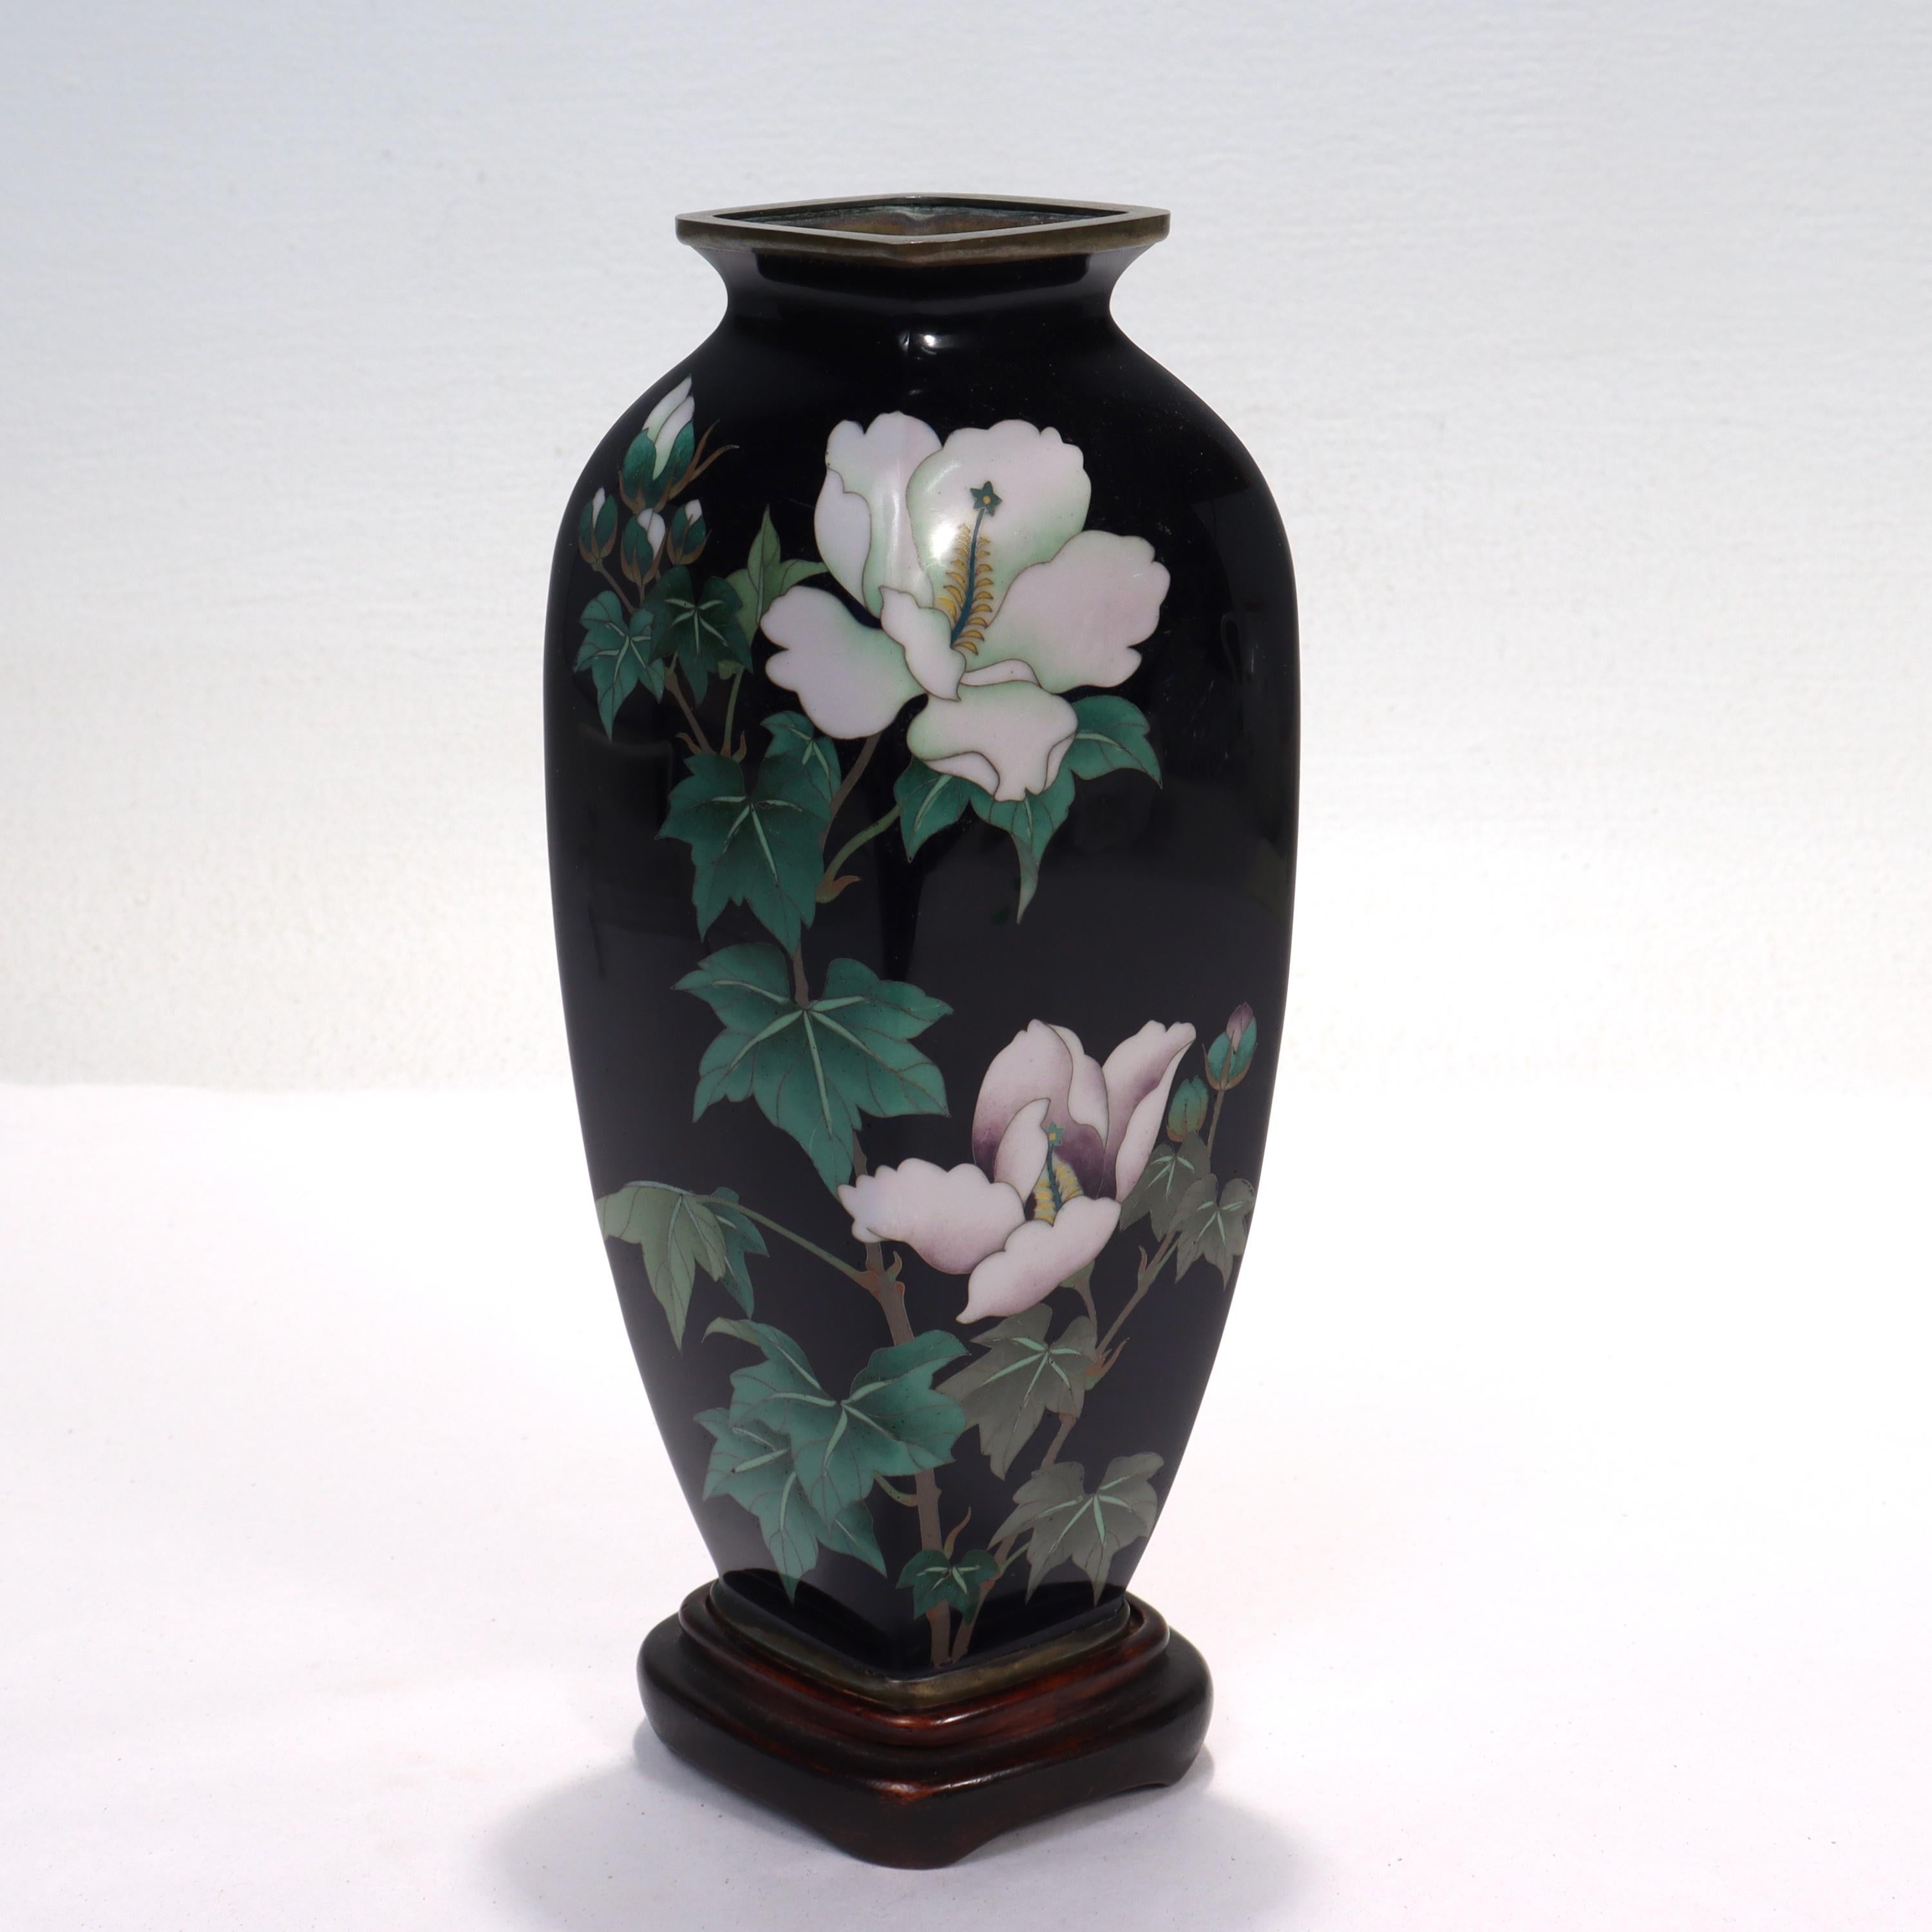 A fine Japanese cloisonne enamel vase.

Decorated with white (stylized morning glory) flowers throughout.

The morning glory - Asagao in Japanese - signifies the bonds of love.

With a trapezoidal opening and base along with conforming wooden